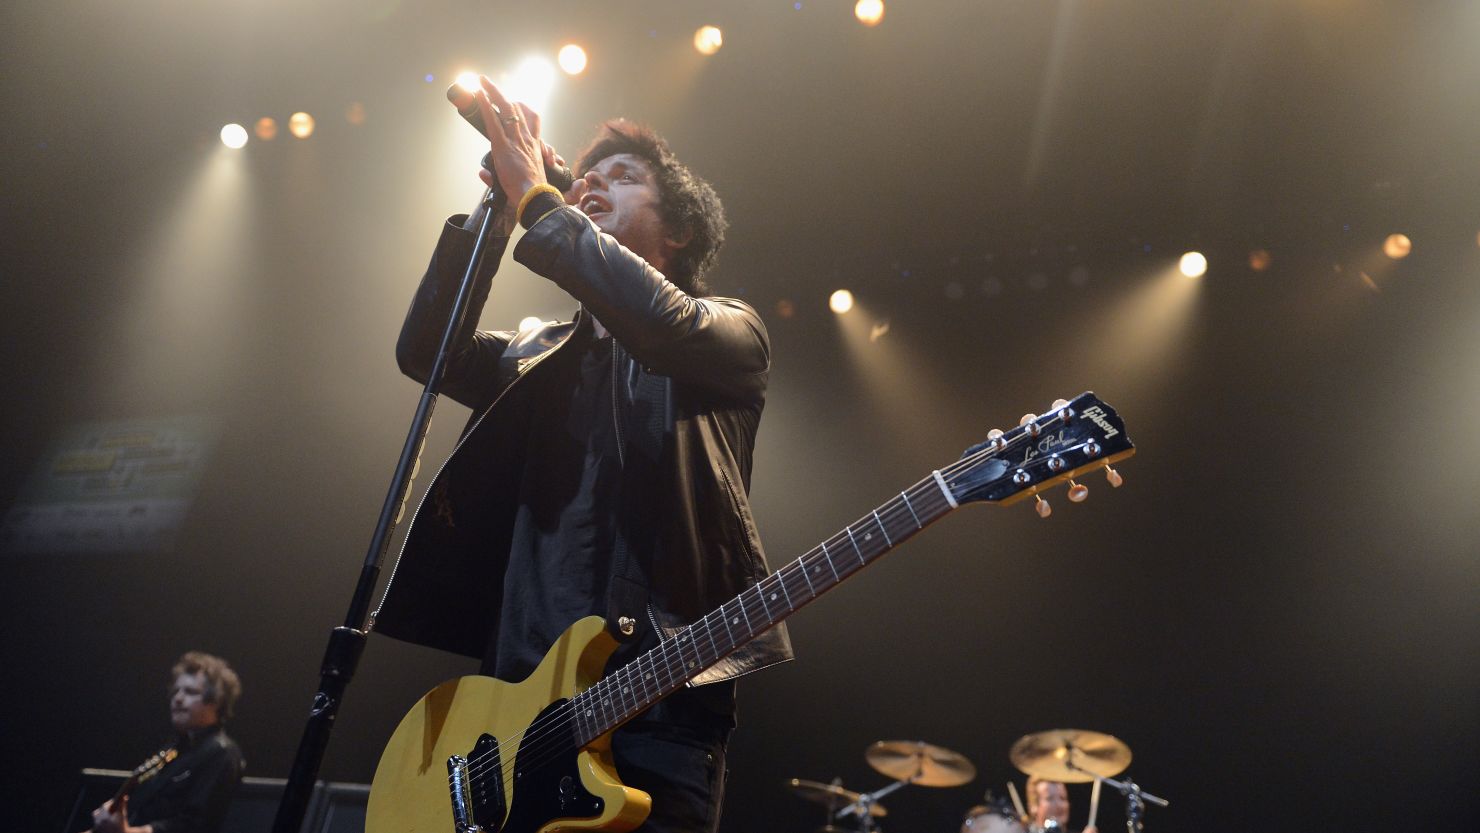 Green Day's Billie Joe Armstrong offered his band's version of what happened at the music festival.